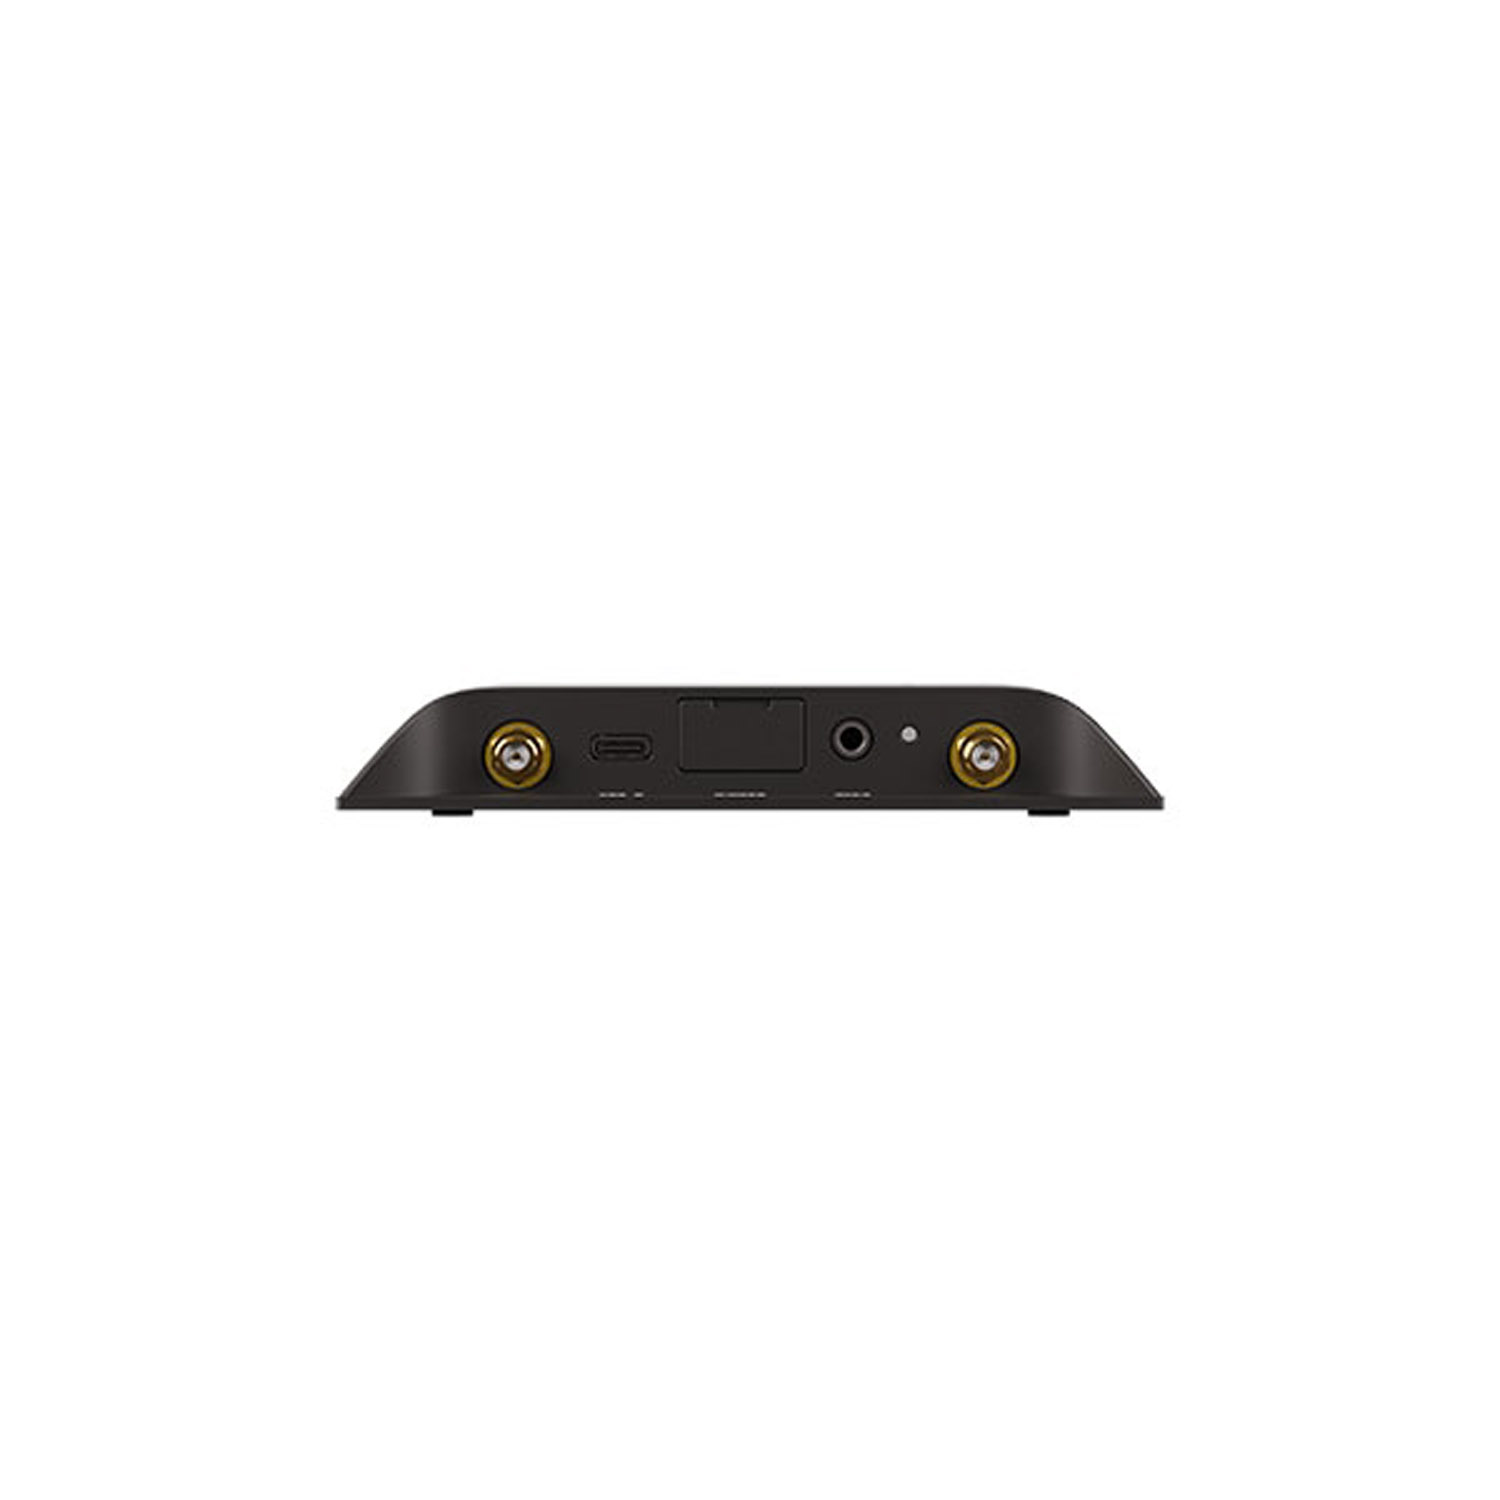 BrightSign LS445 4K Small Digital Signage Player with USB Type C Input